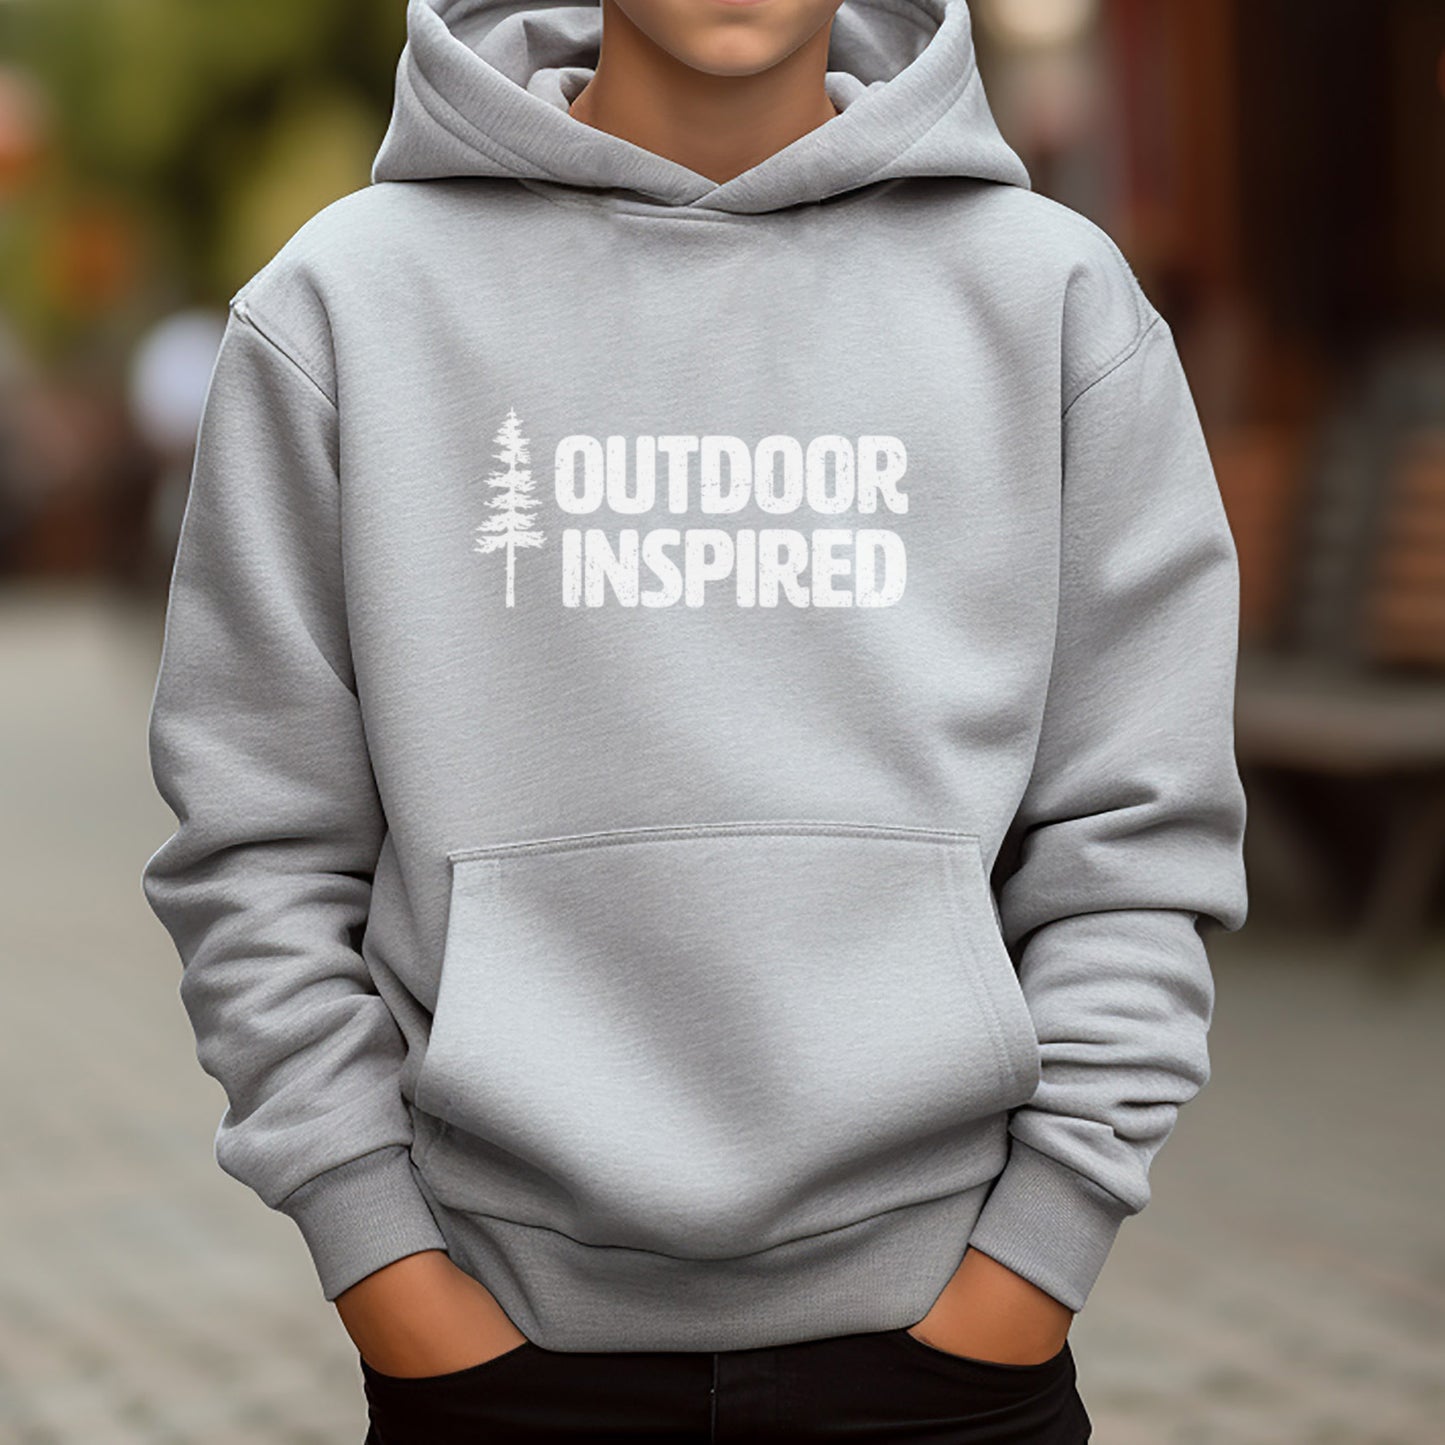 Outdoor Inspired hoodie, youth unisex